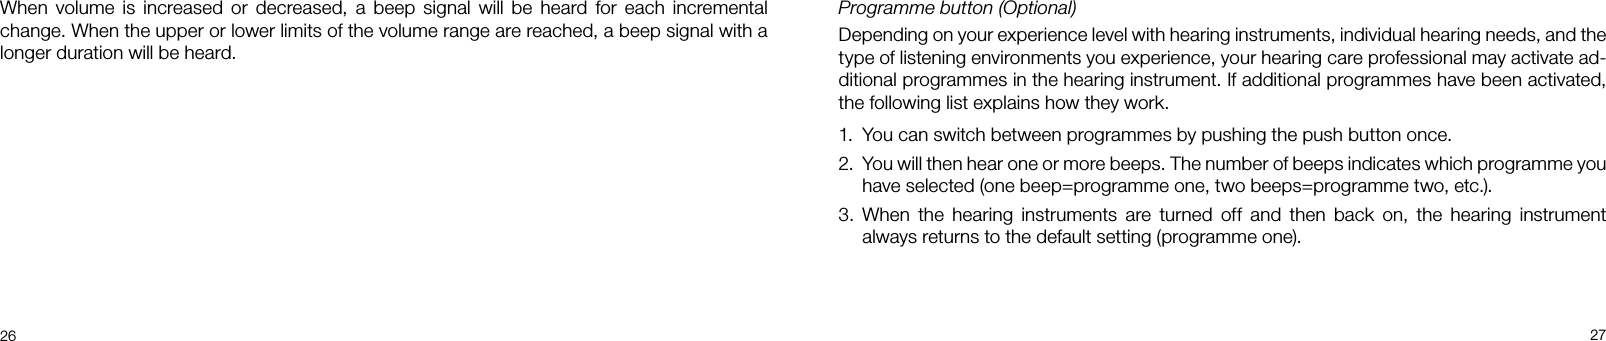 26 27Programme button (Optional)Depending on your experience level with hearing instruments, individual hearing needs, and the type of listening environments you experience, your hearing care professional may activate ad-ditional programmes in the hearing instrument. If additional programmes have been activated, the following list explains how they work.1.  You can switch between programmes by pushing the push button once.2.  You will then hear one or more beeps. The number of beeps indicates which programme you have selected (one beep=programme one, two beeps=programme two, etc.). 3.  When the hearing instruments are turned off and then back on, the hearing instrument always returns to the default setting (programme one).When volume is increased or decreased, a beep signal will be heard for each incremental change. When the upper or lower limits of the volume range are reached, a beep signal with a longer duration will be heard.